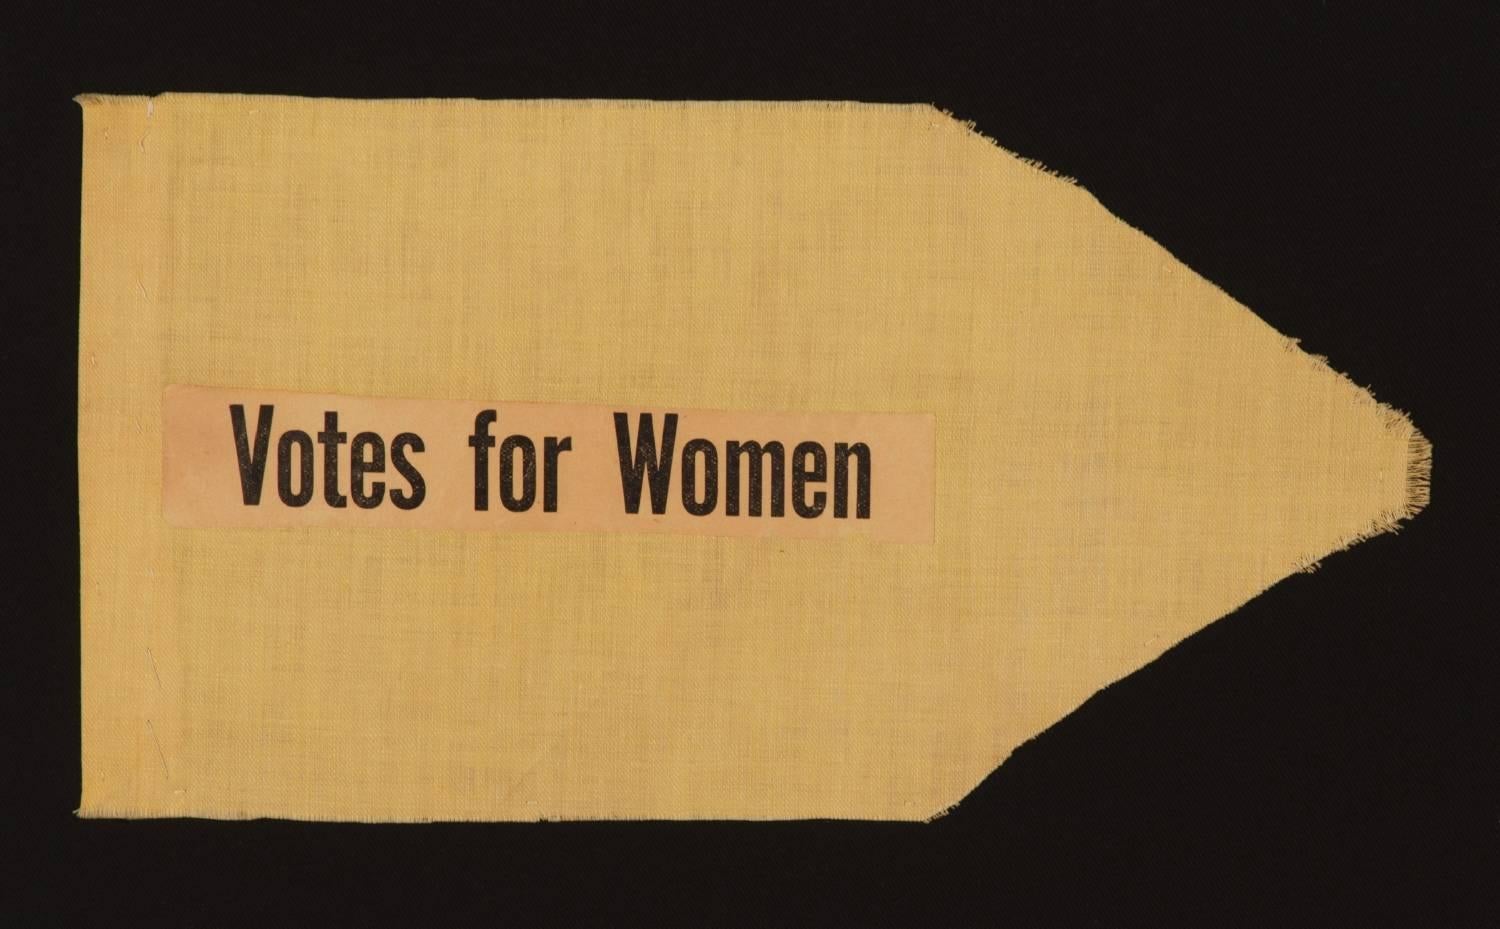 SMALL SUFFRAGETTE PENNANT WITH "VOTES FOR WOMEN" TEXT, 1910-1920

Small Suffragette pennant, made from a length of yellow cotton cloth with applied yellow paper, on which "Votes for Women" was professionally printed.  A